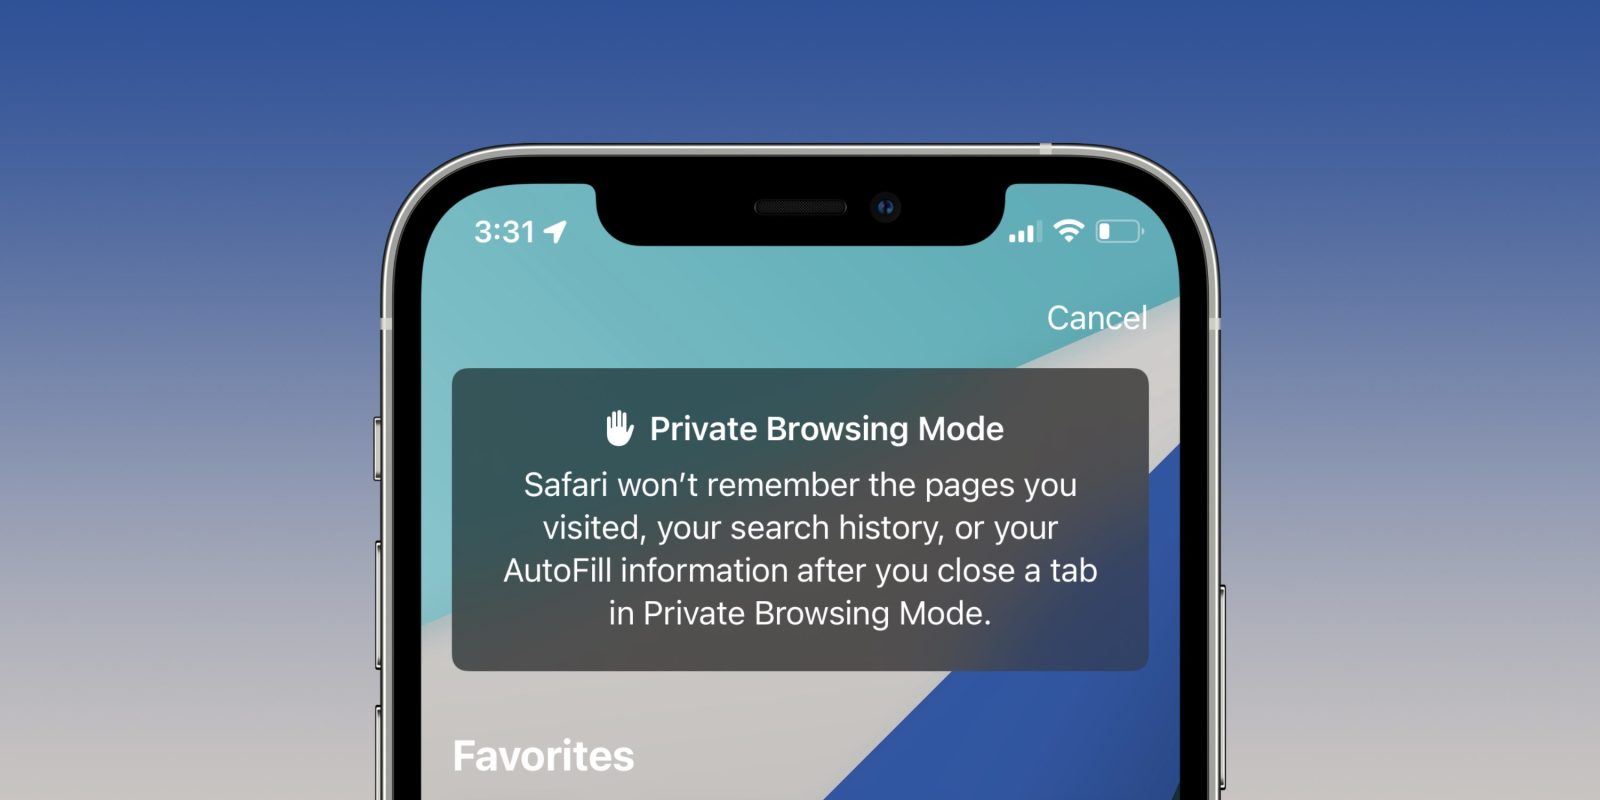 How to use iPhone Private Browsing in Safari with iOS 15